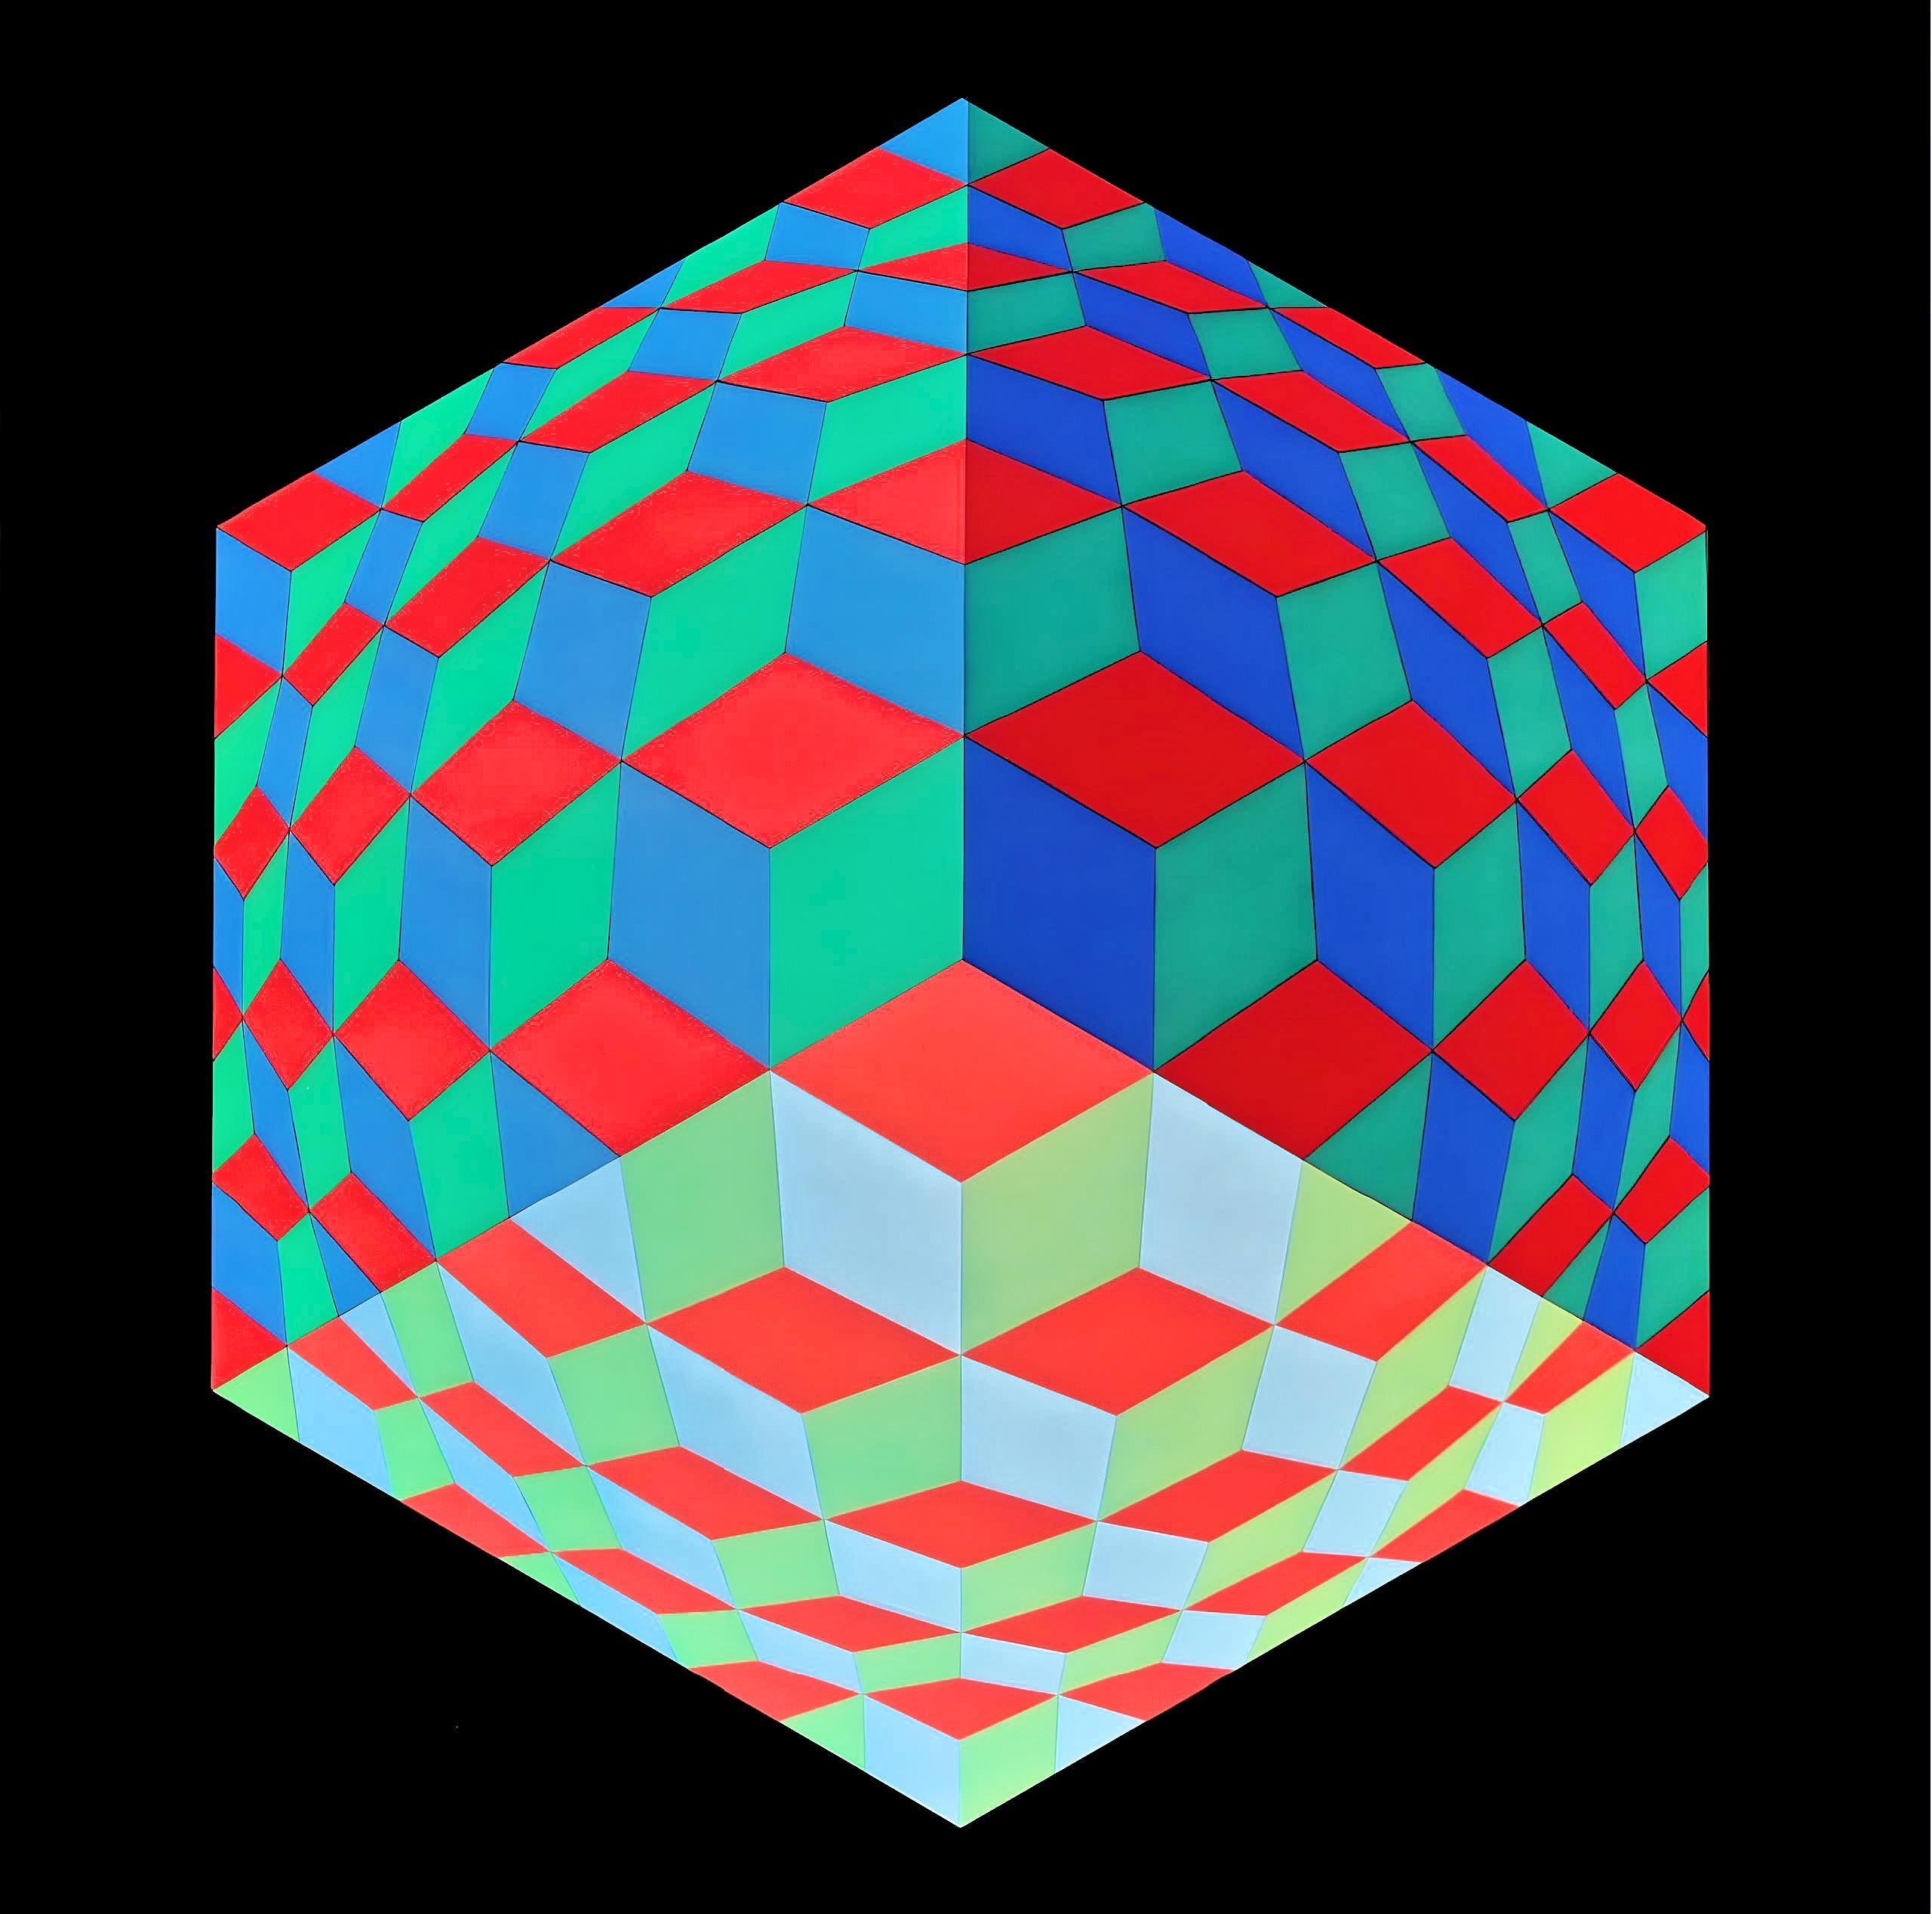 Vasarely, Composition, Progressions (after)